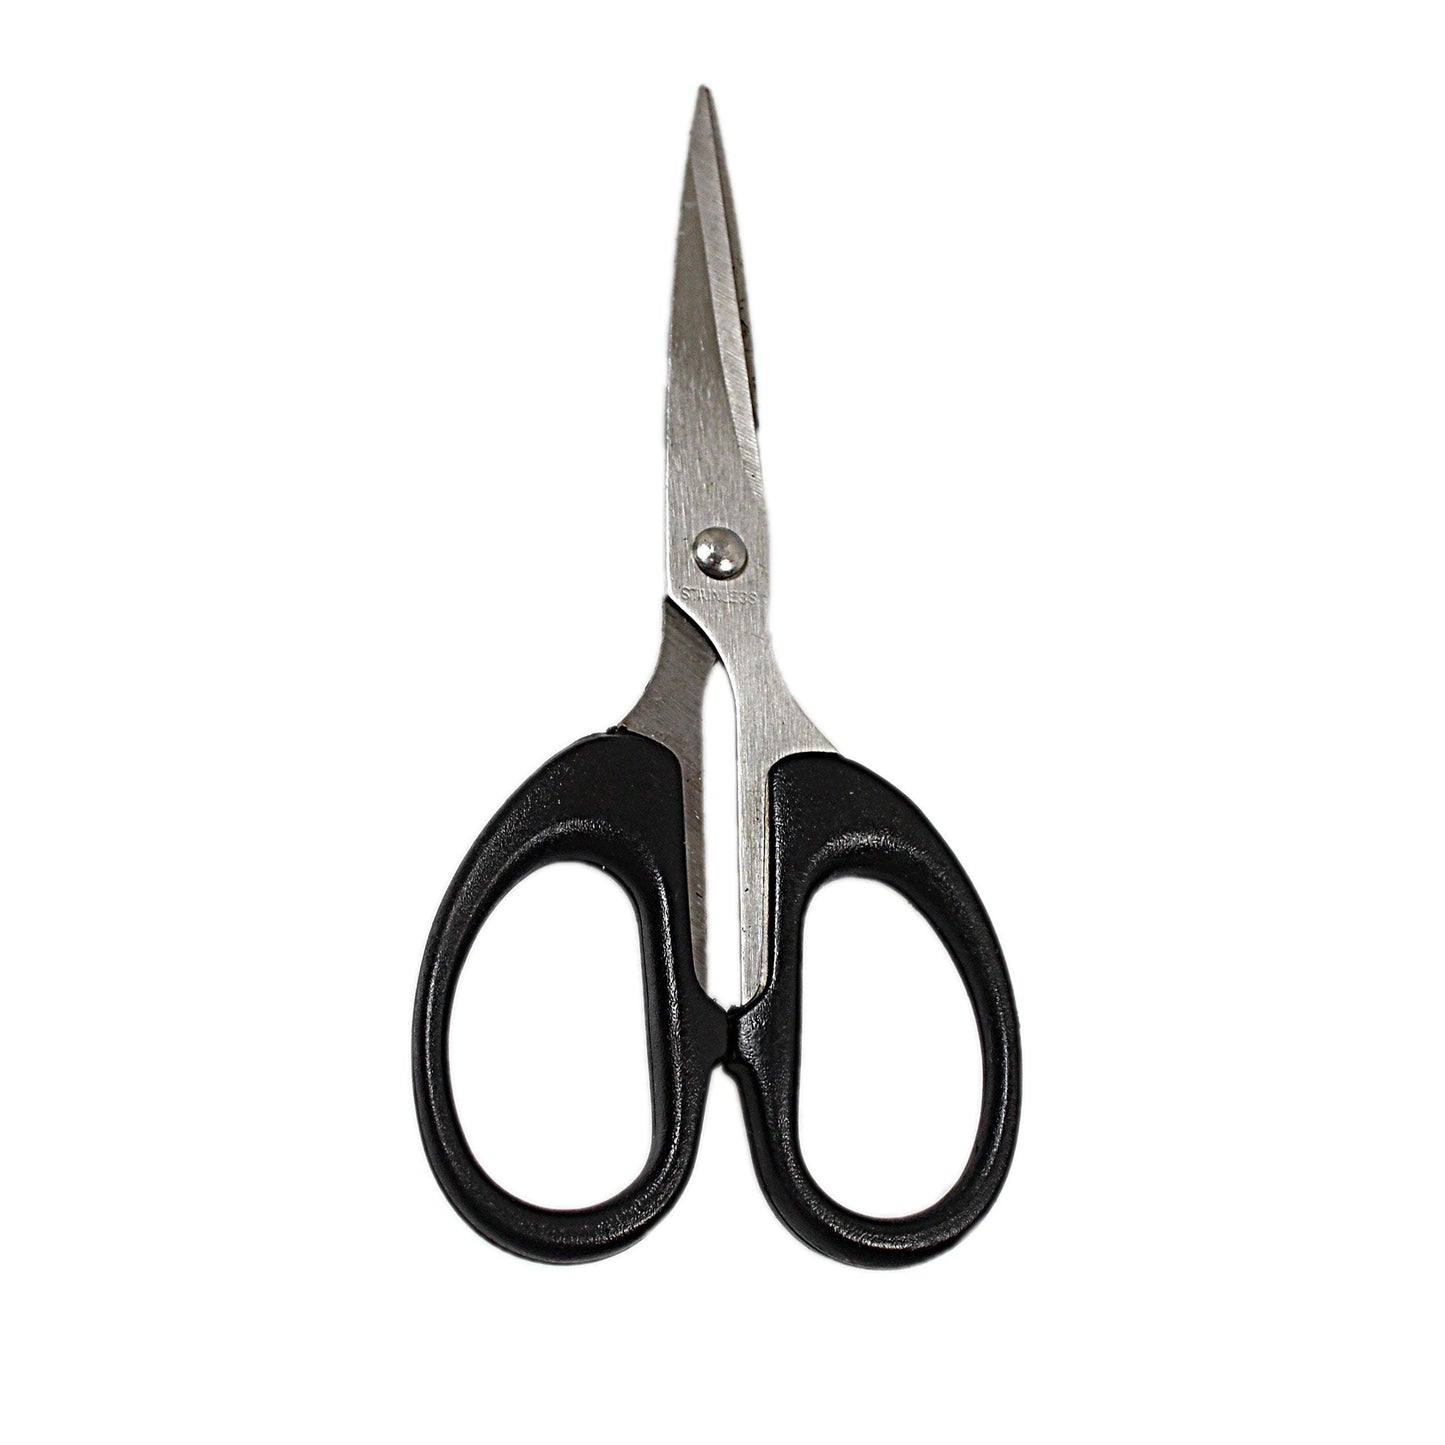 Stainless Steel Basic Scissors With ABS Handle Comfortable Grip 3683 (Large Letter Rate)